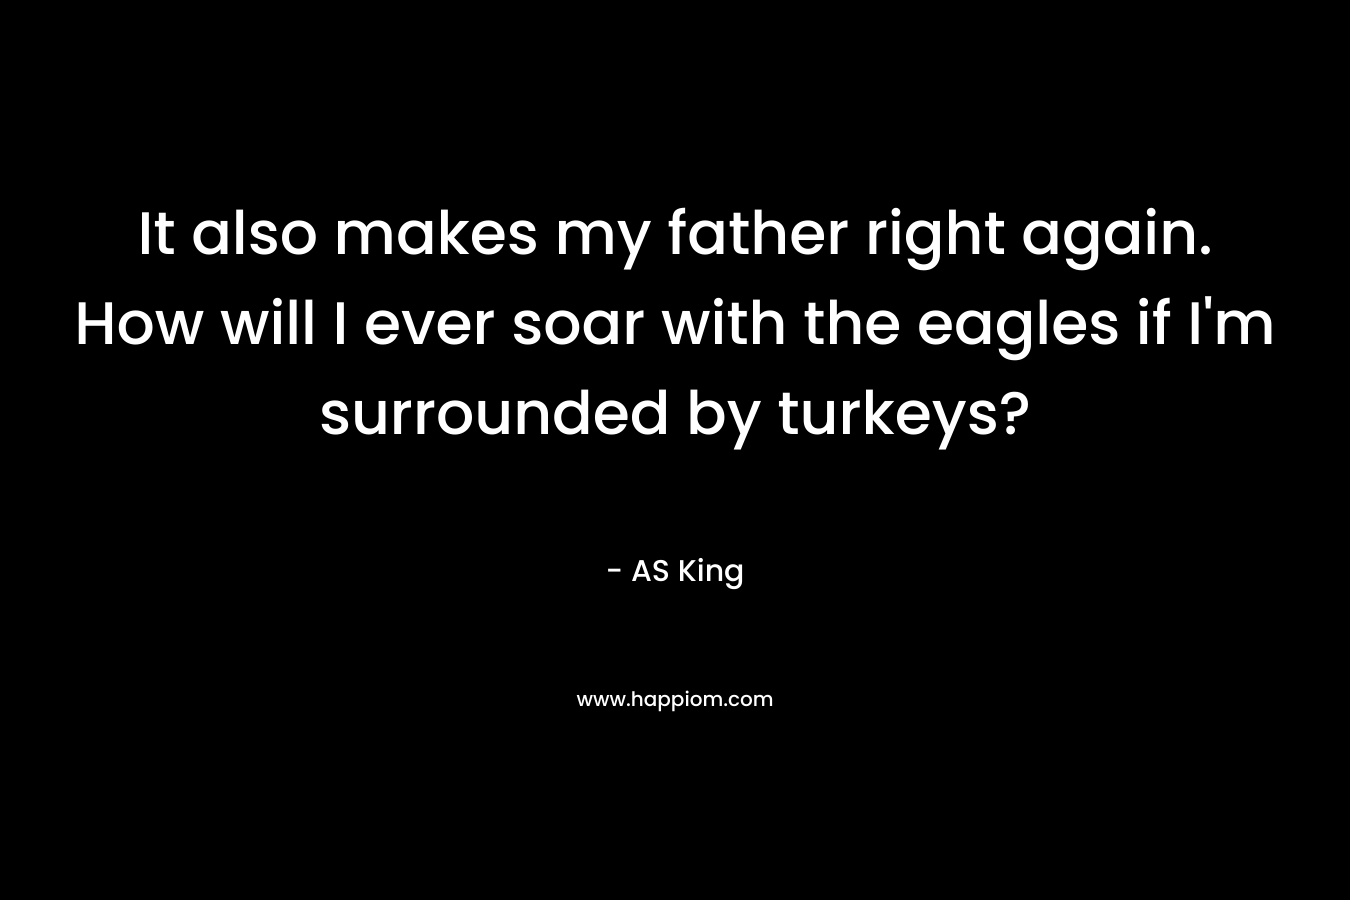 It also makes my father right again. How will I ever soar with the eagles if I'm surrounded by turkeys?